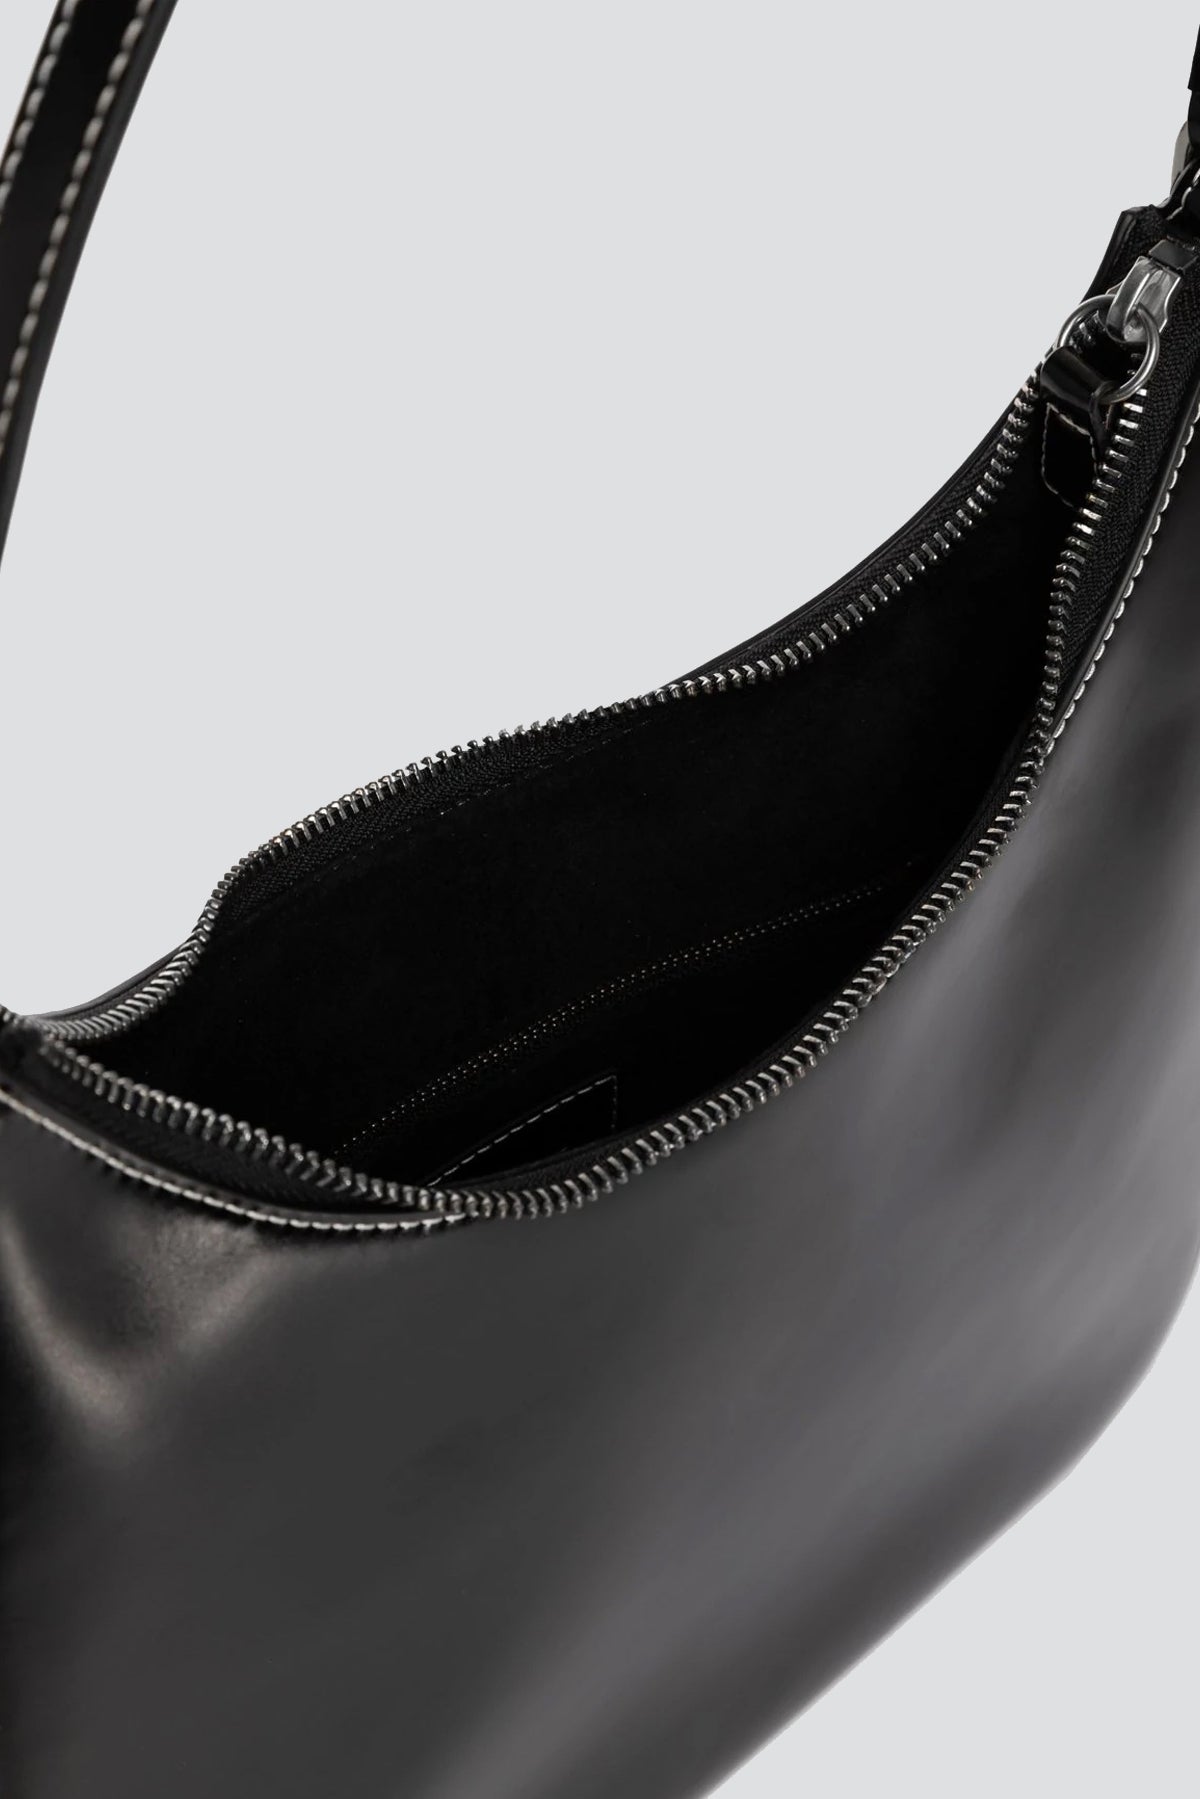 Leather Sac - Assembly New York